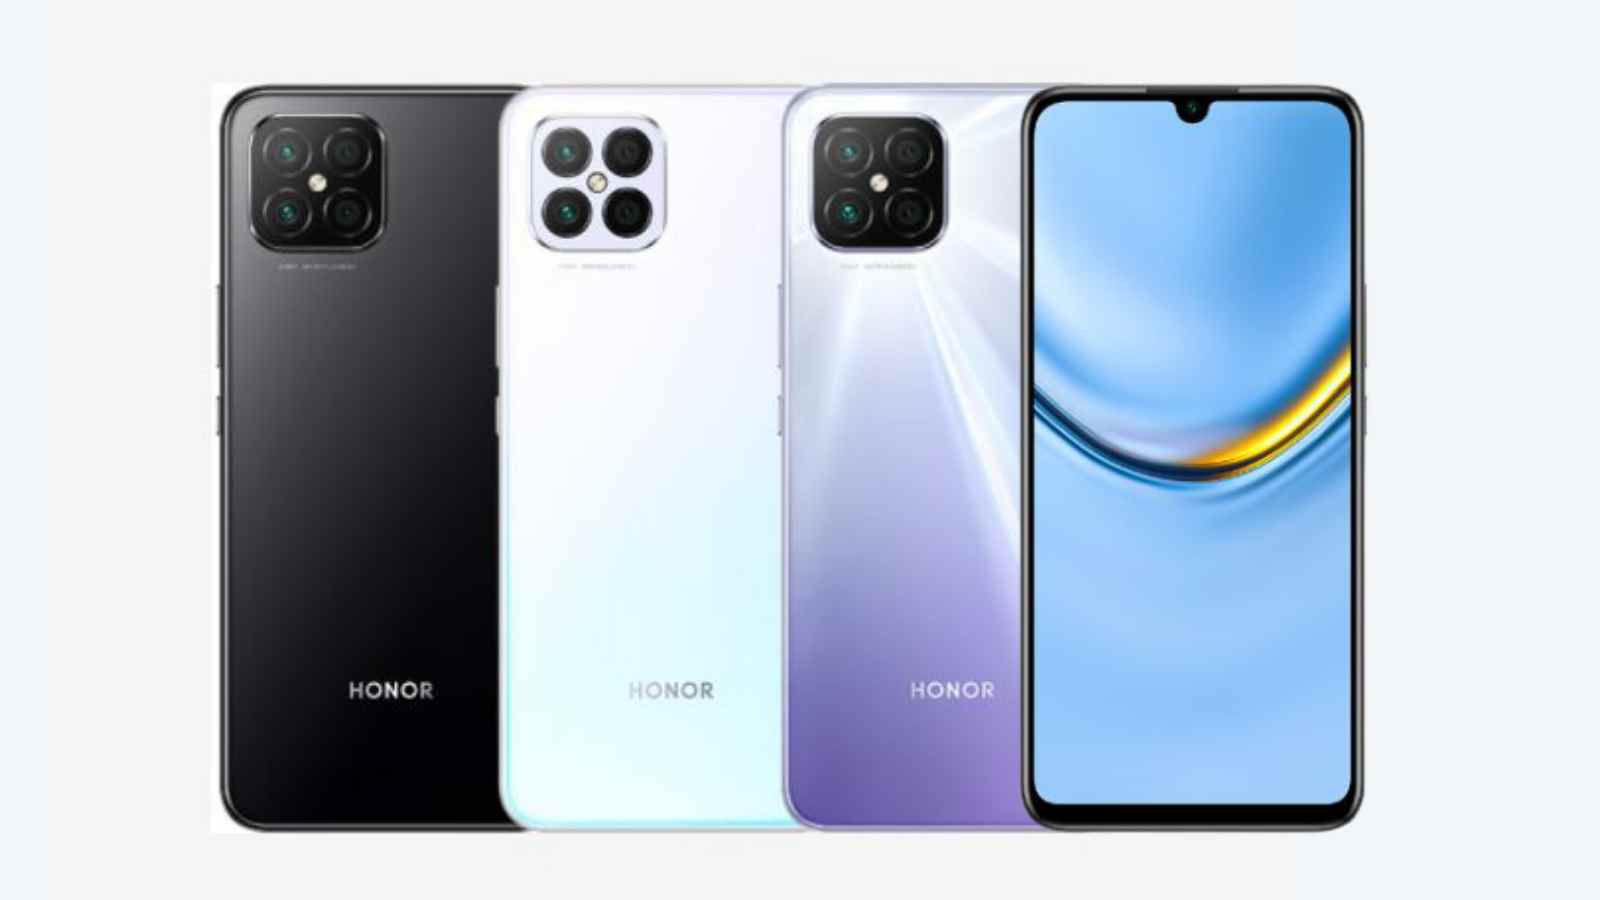 Honor Play 20 Pro with MediaTek Helio G80, 64MP Quad rear camera launched: Price, Specifications